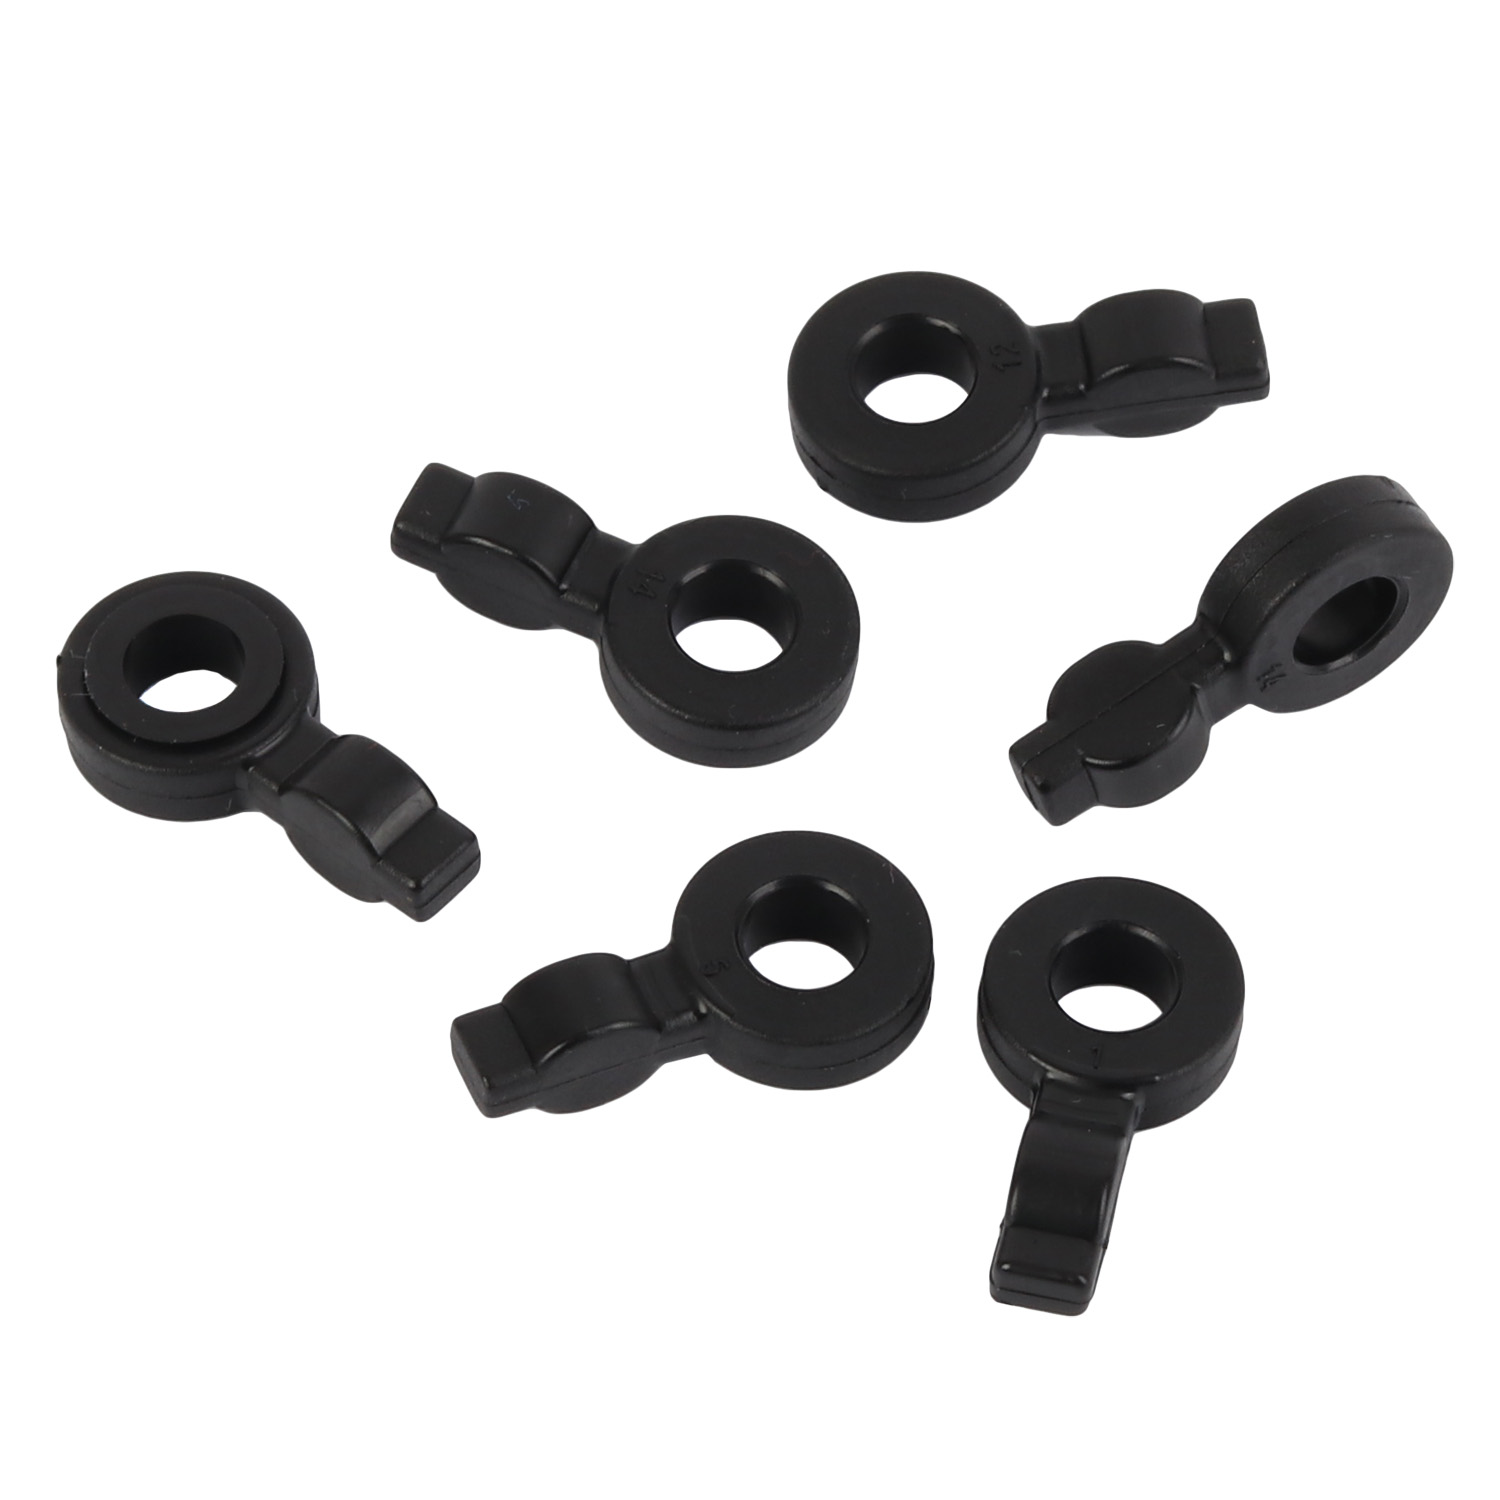 Immagine di SKS Cylinder Plug for Fenders (6 Pieces)